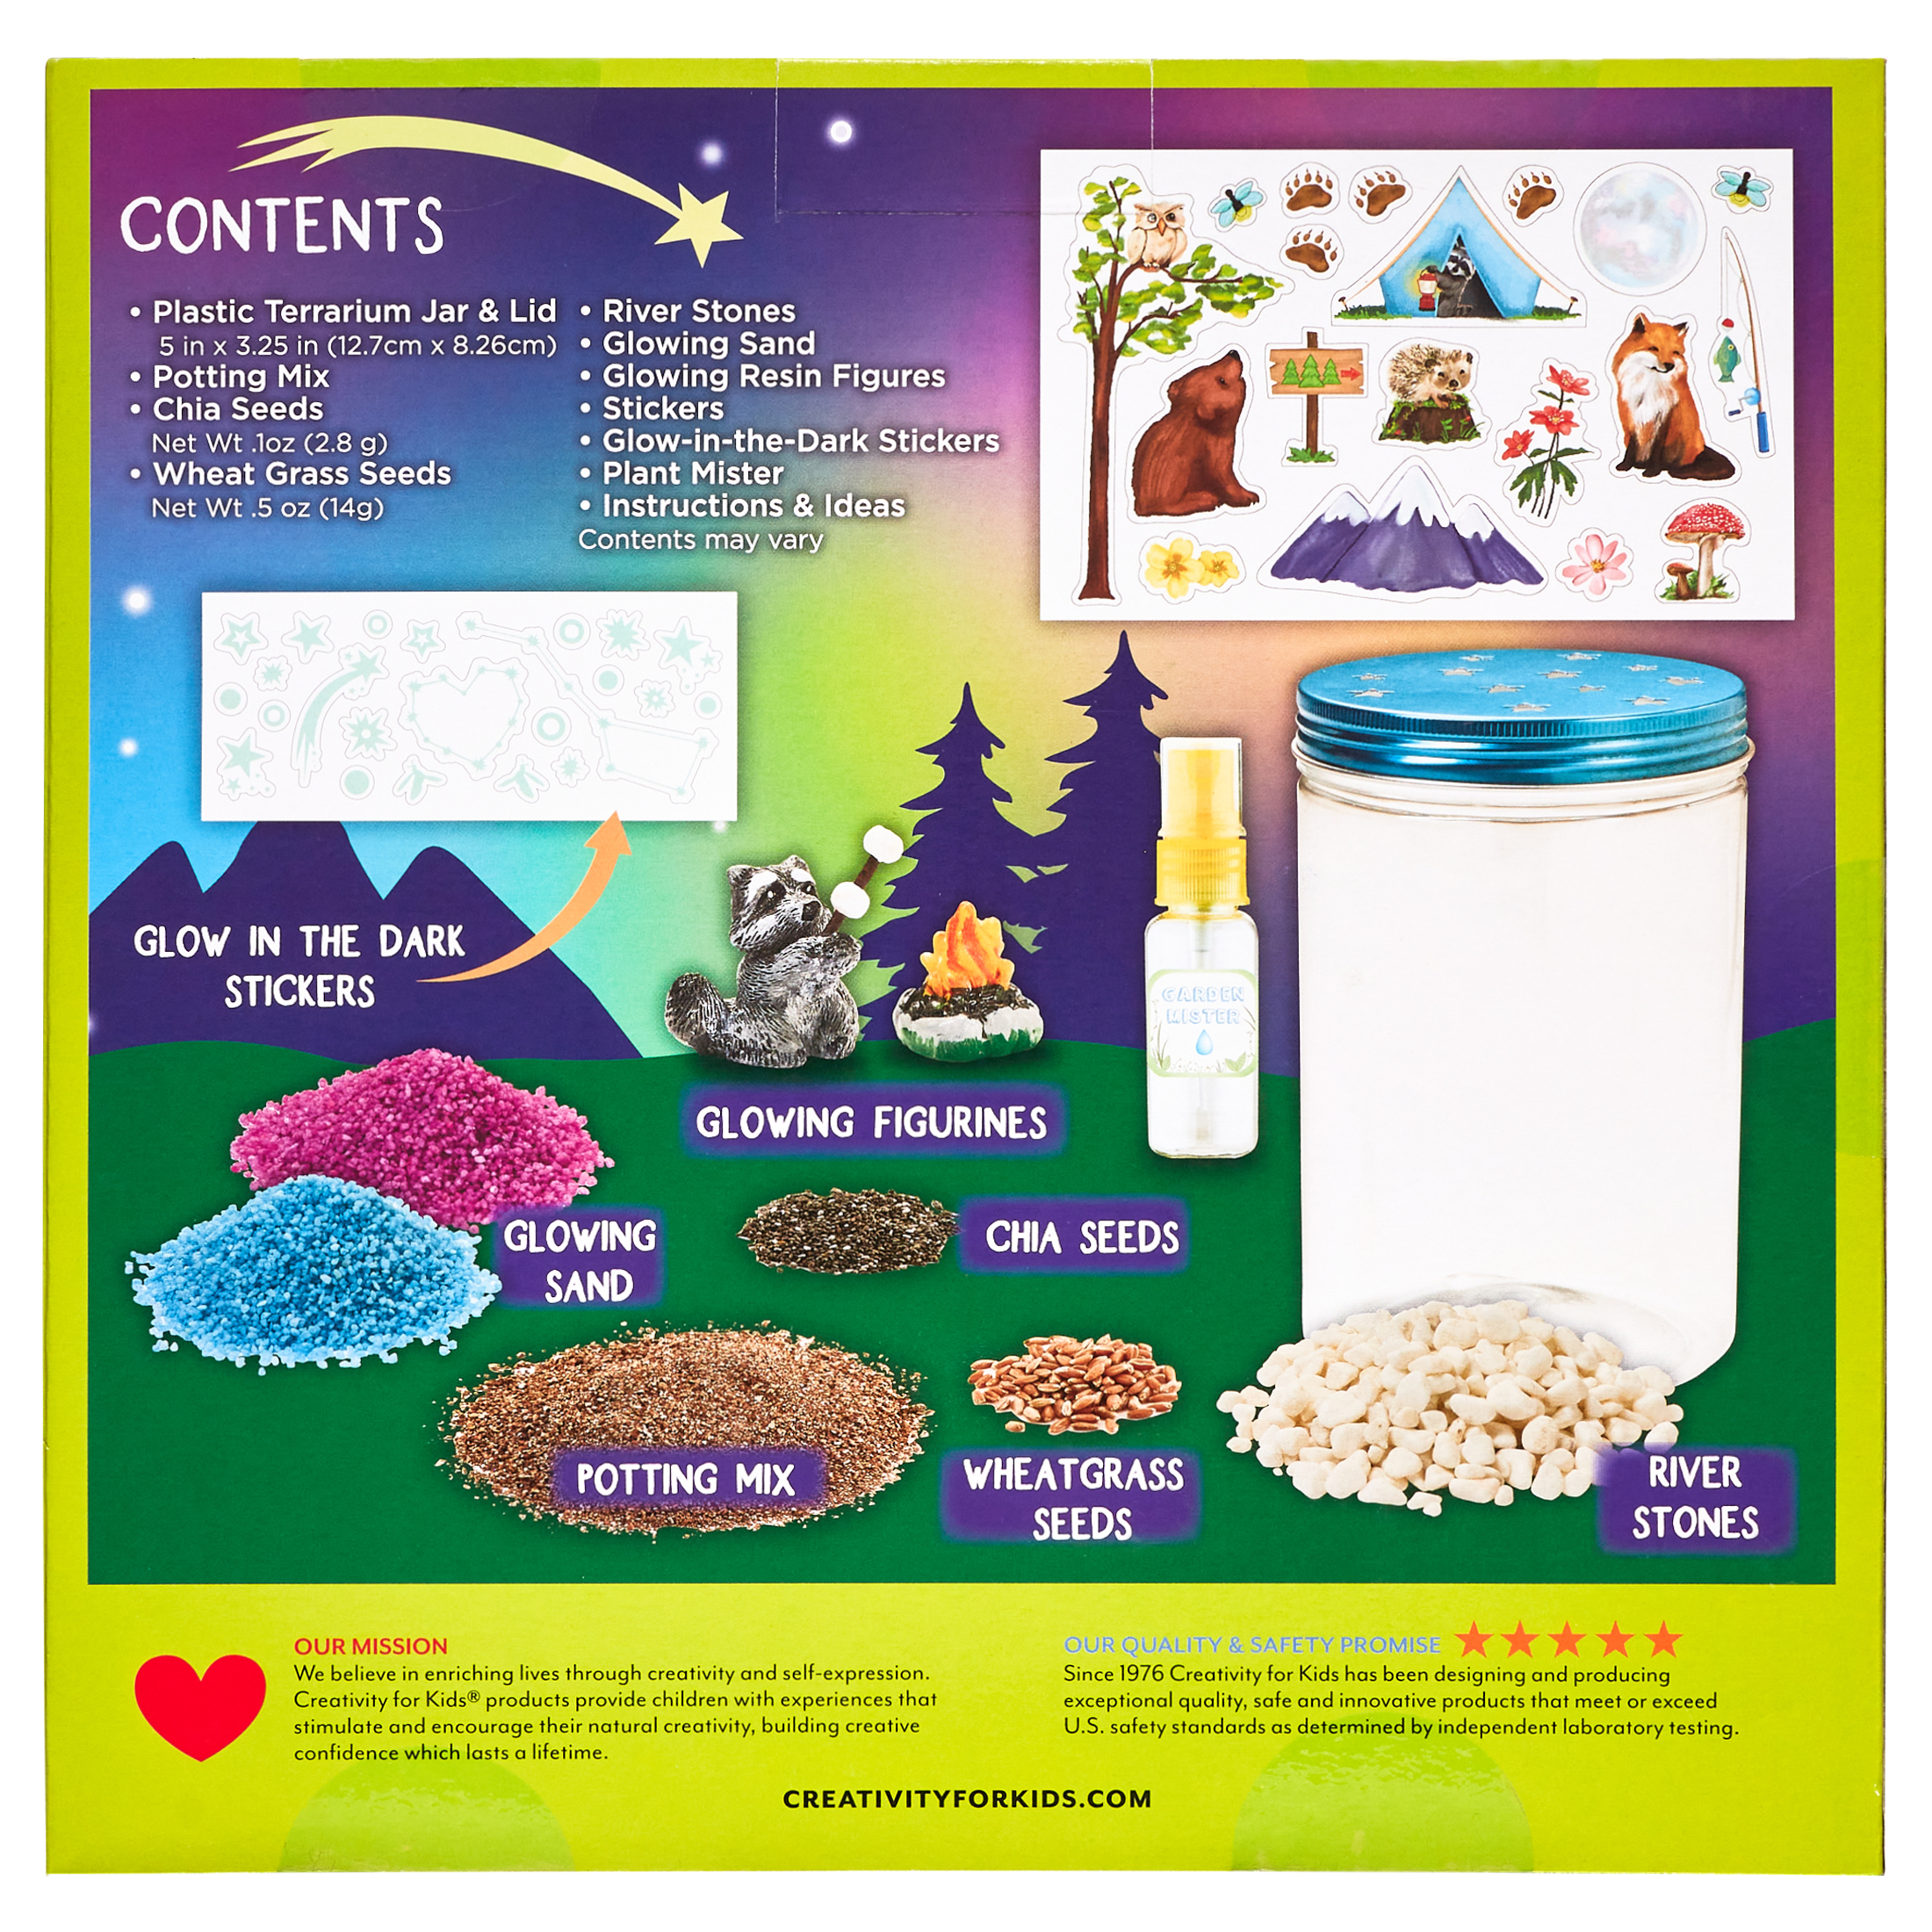 Creativity for Kids Grow N’ Glow Terrarium – Child Craft Activity for Boys and Girls - image 10 of 13